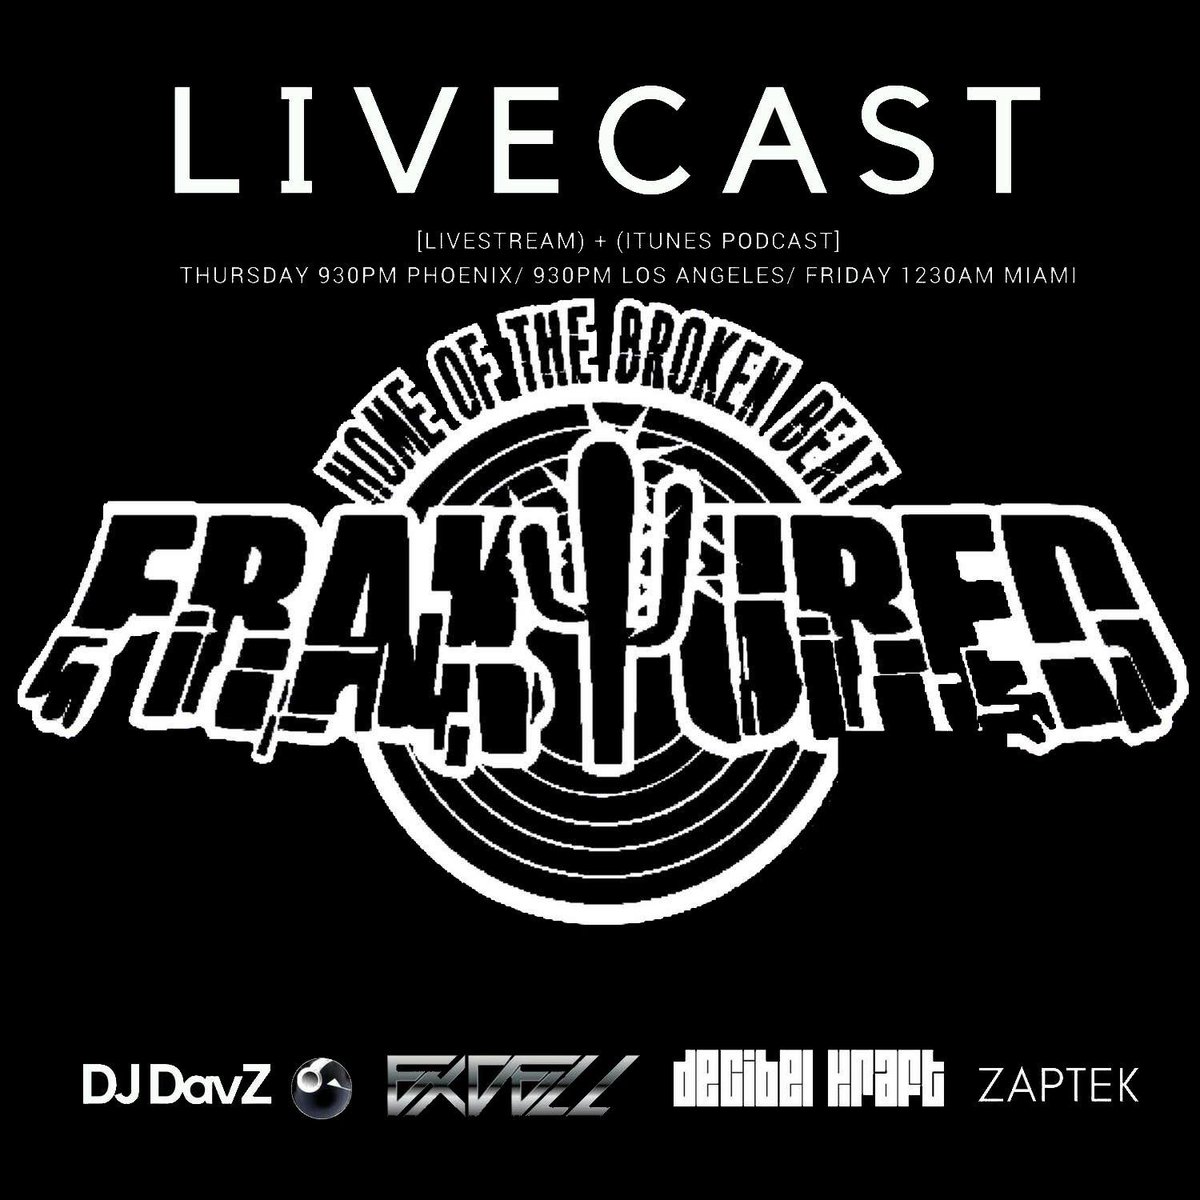 Tune in this Thursday for a very special psybreaks set from DJ Excell and DJ Davz on Fraktured Phoenix Livestream and iTunes Podcast! Broadcast starts Thursday Night @ 9:30pm Phoenix/9:30pm Los Angeles/Friday 12:30am Miami